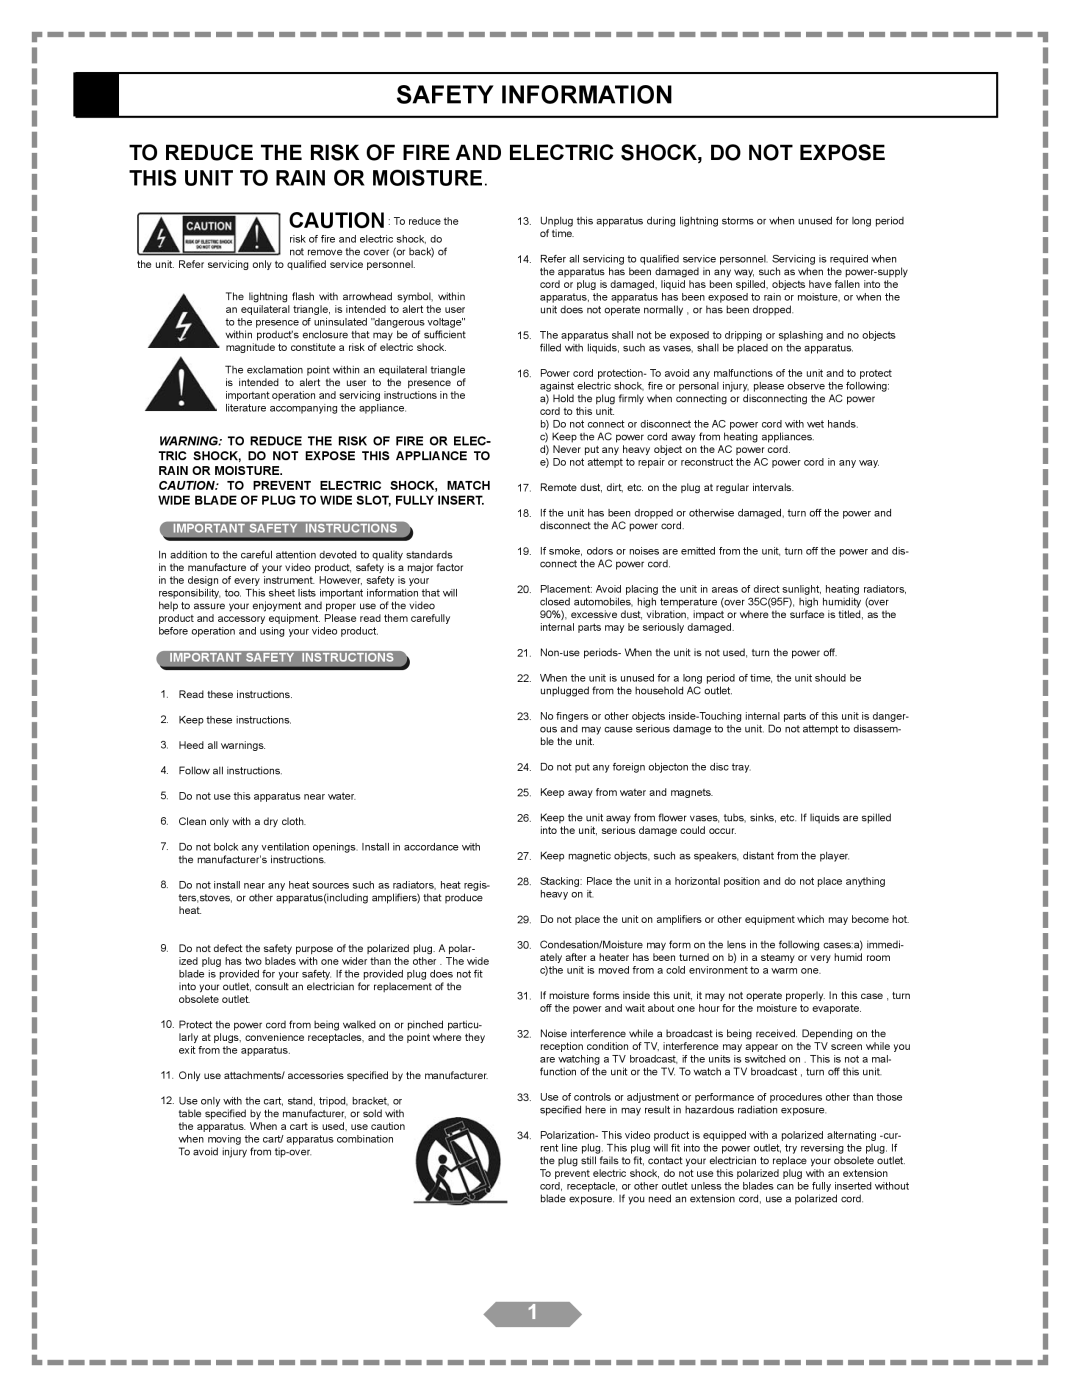 Apex Digital HT-175 manual Safety Information, Important Safety Instructions 